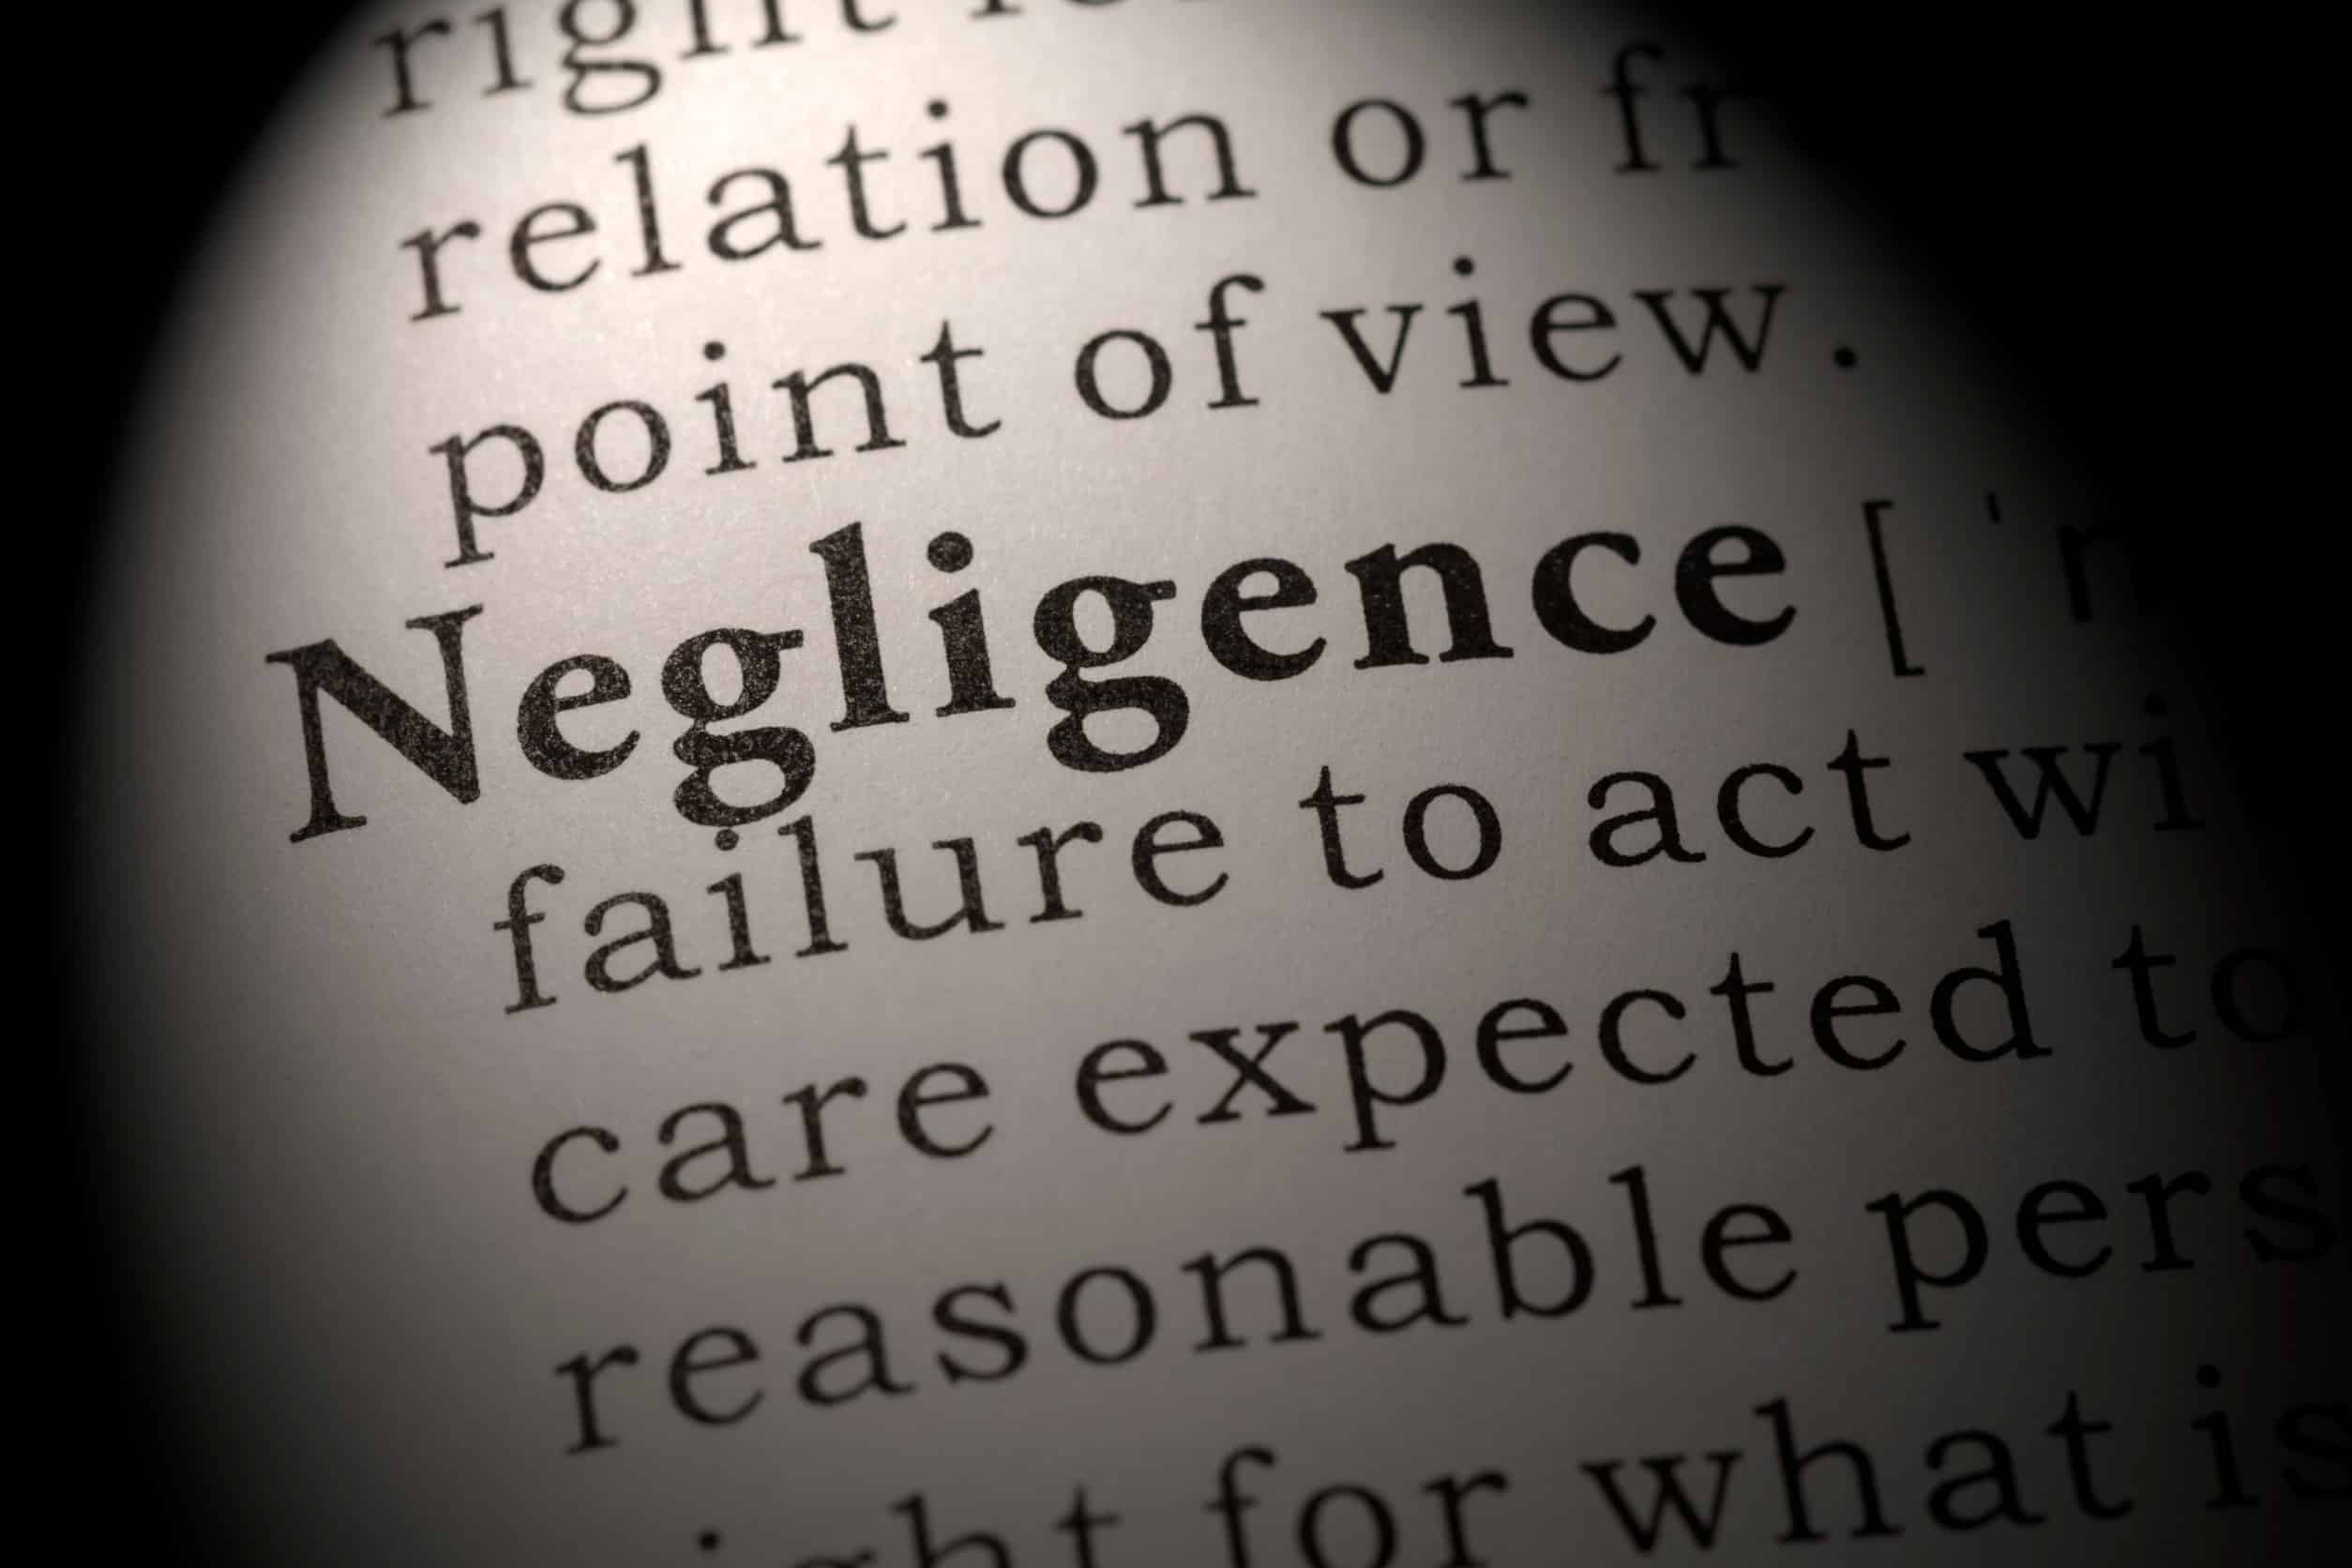 Hotel Negligence in FL: Do You Have a Case?